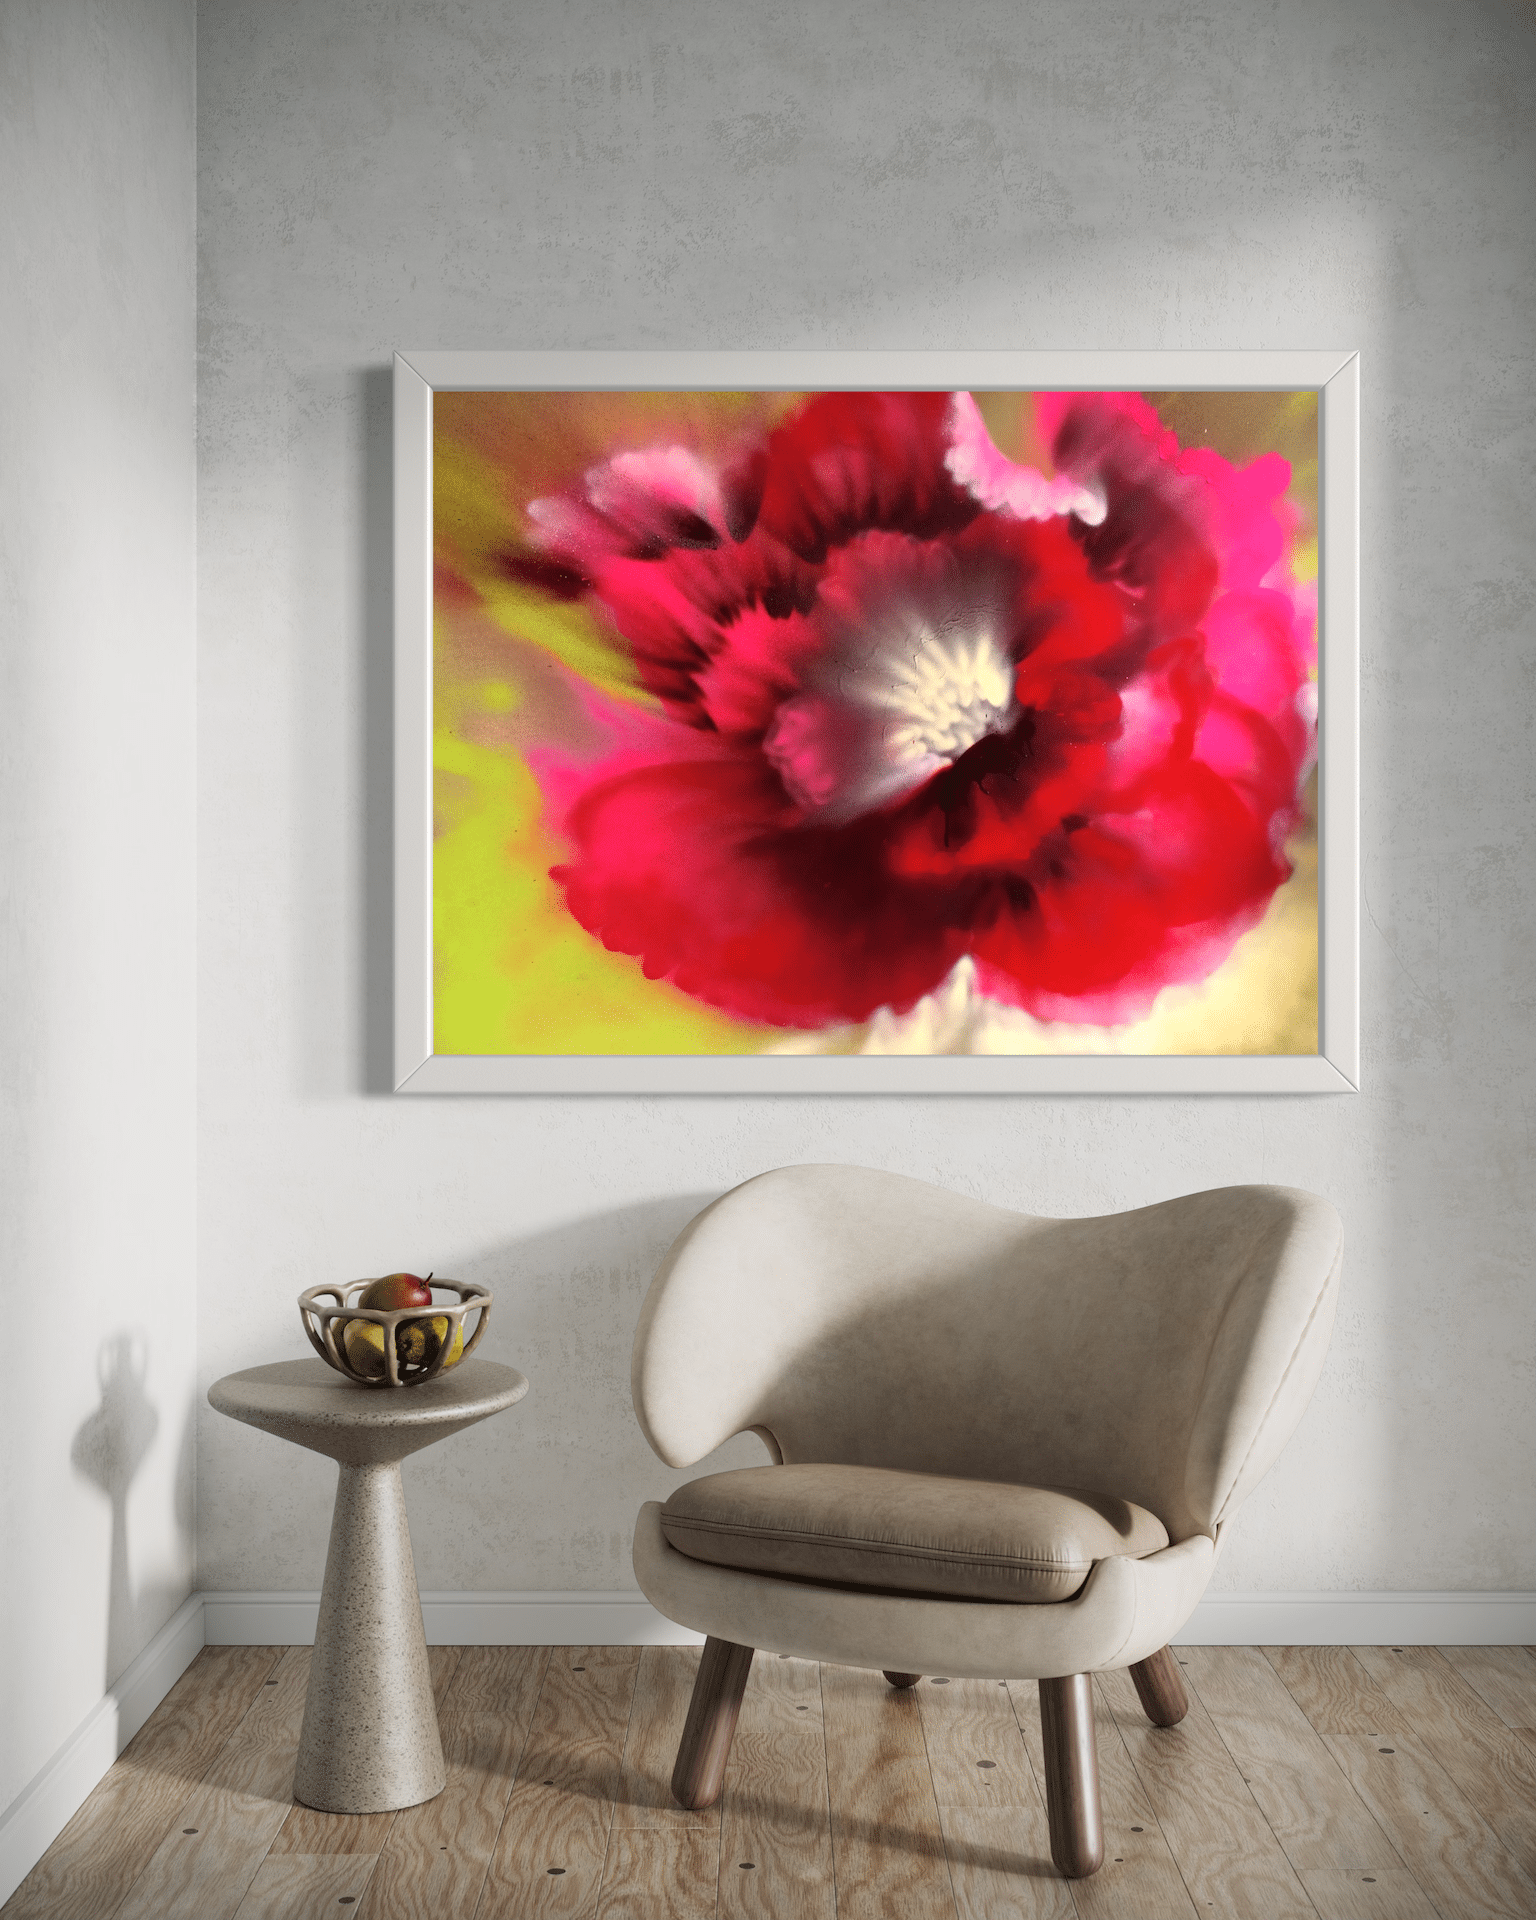 A contemporary abstract floral acrylic spray painting on metal panel by artist Cynthia McLoughlin